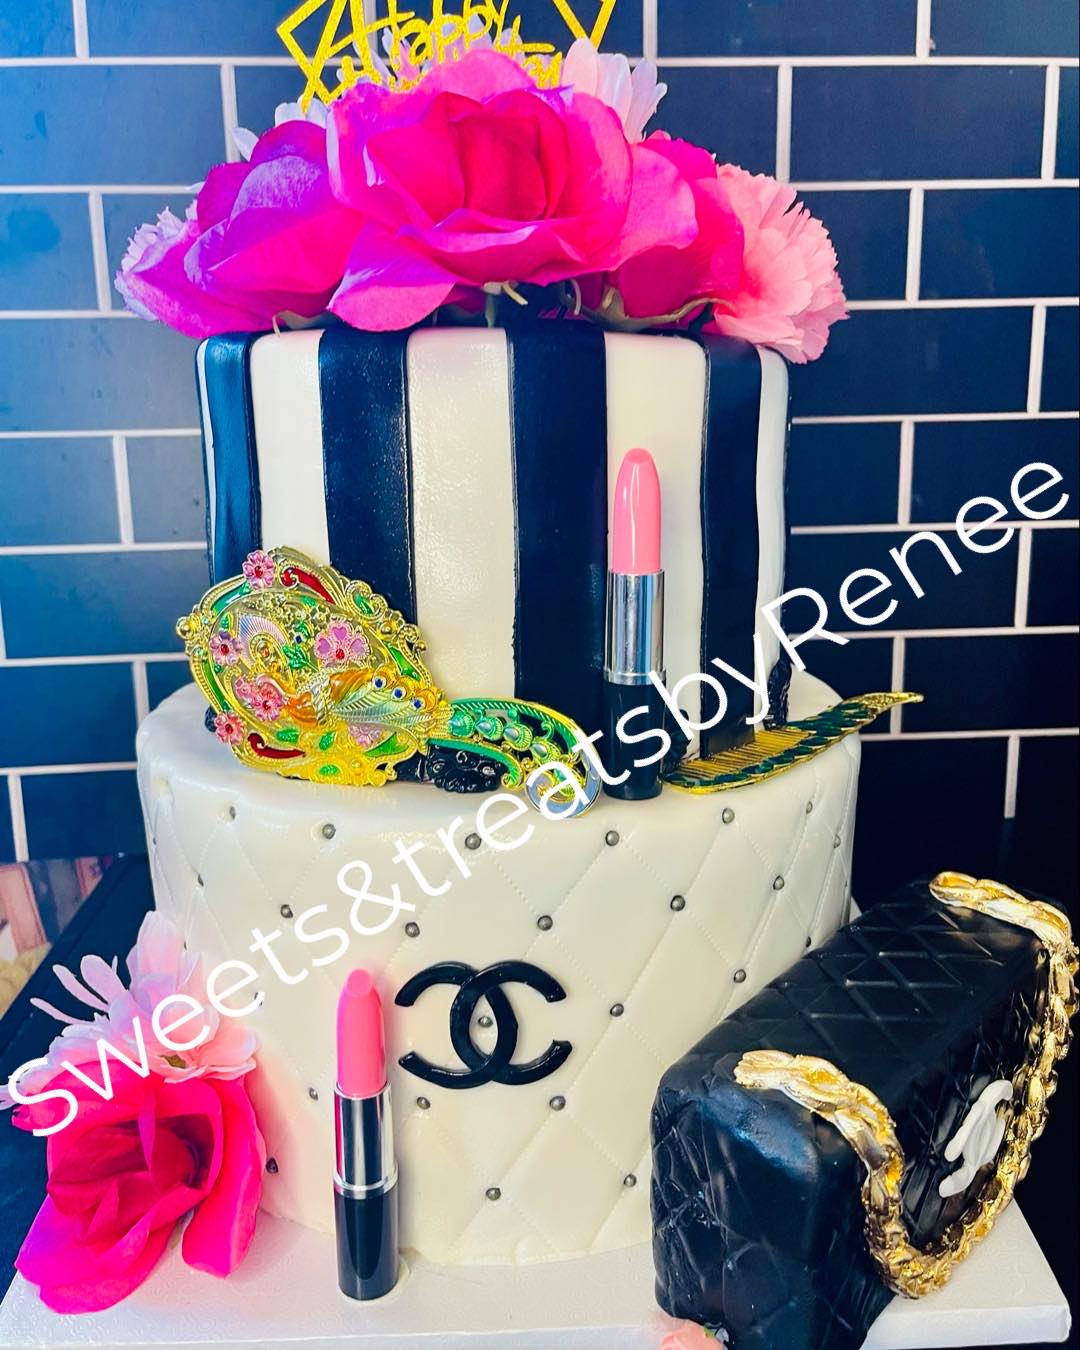 Cake from Sweets & Treats by Renee